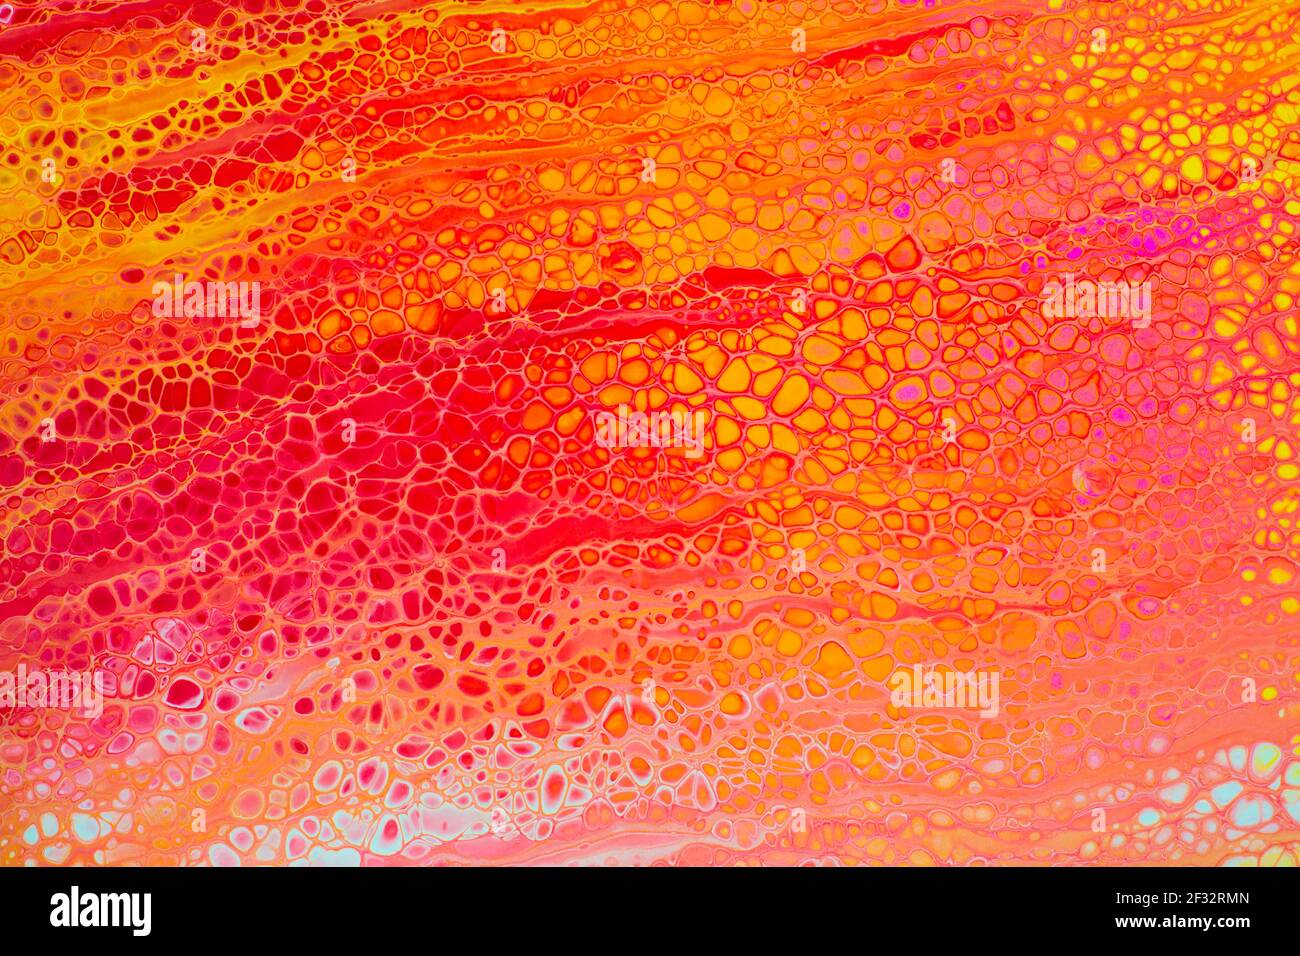 Colorful abstract acrylic painting in red, yellow and white. Free flowing cells. Pouring. Stock Photo